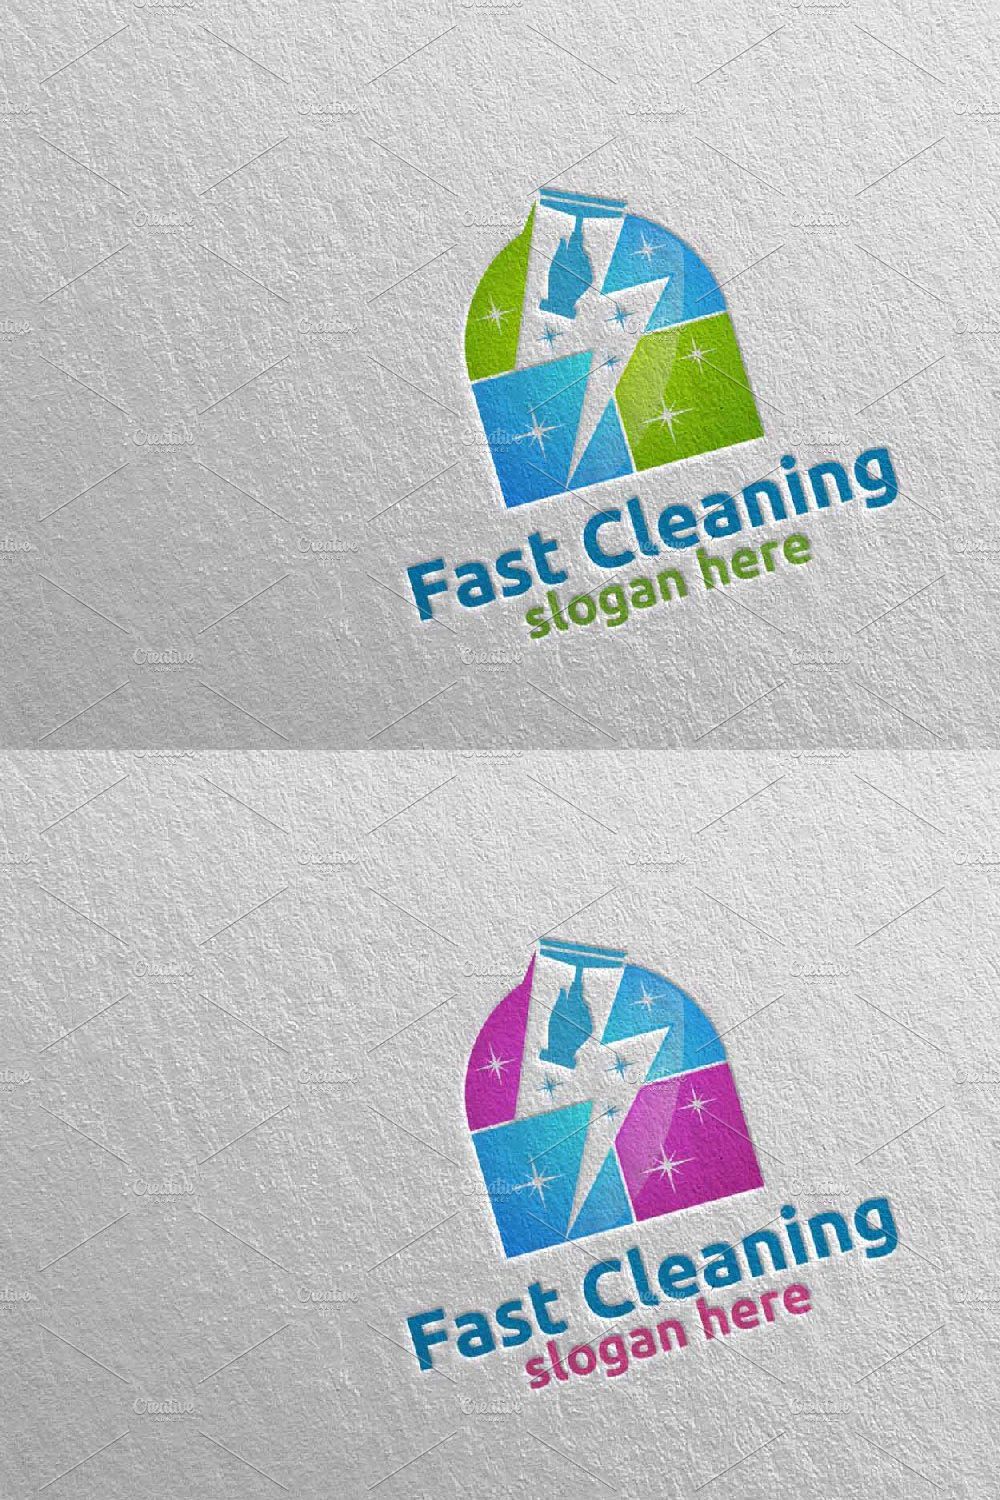 Fast Cleaning Service Logo pinterest preview image.